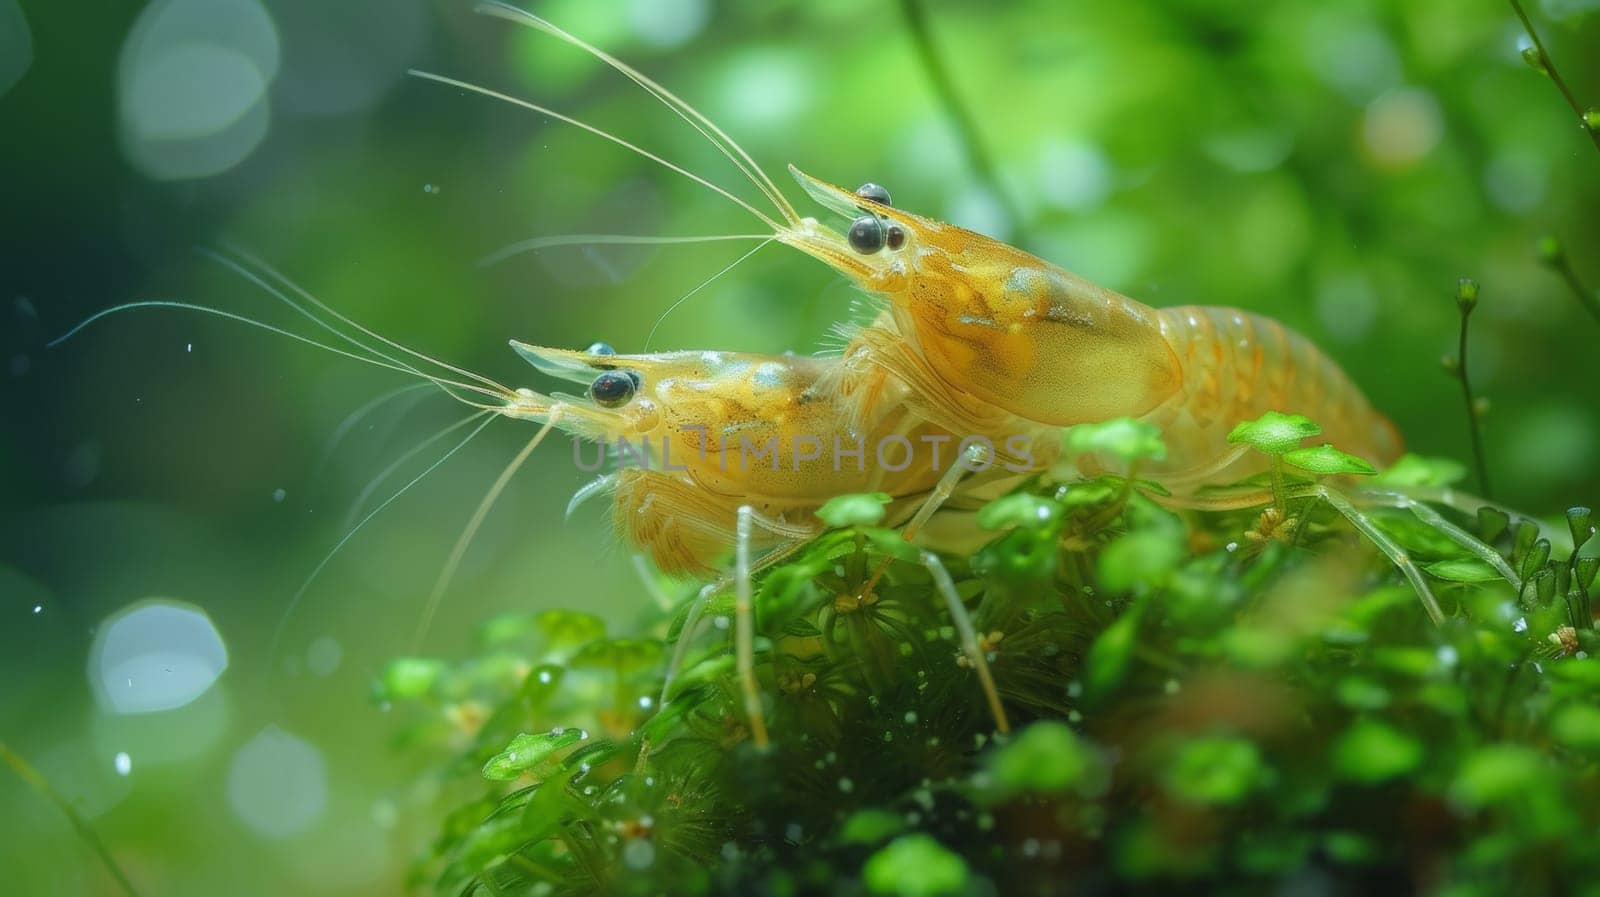 Two shrimp are sitting on top of some green moss